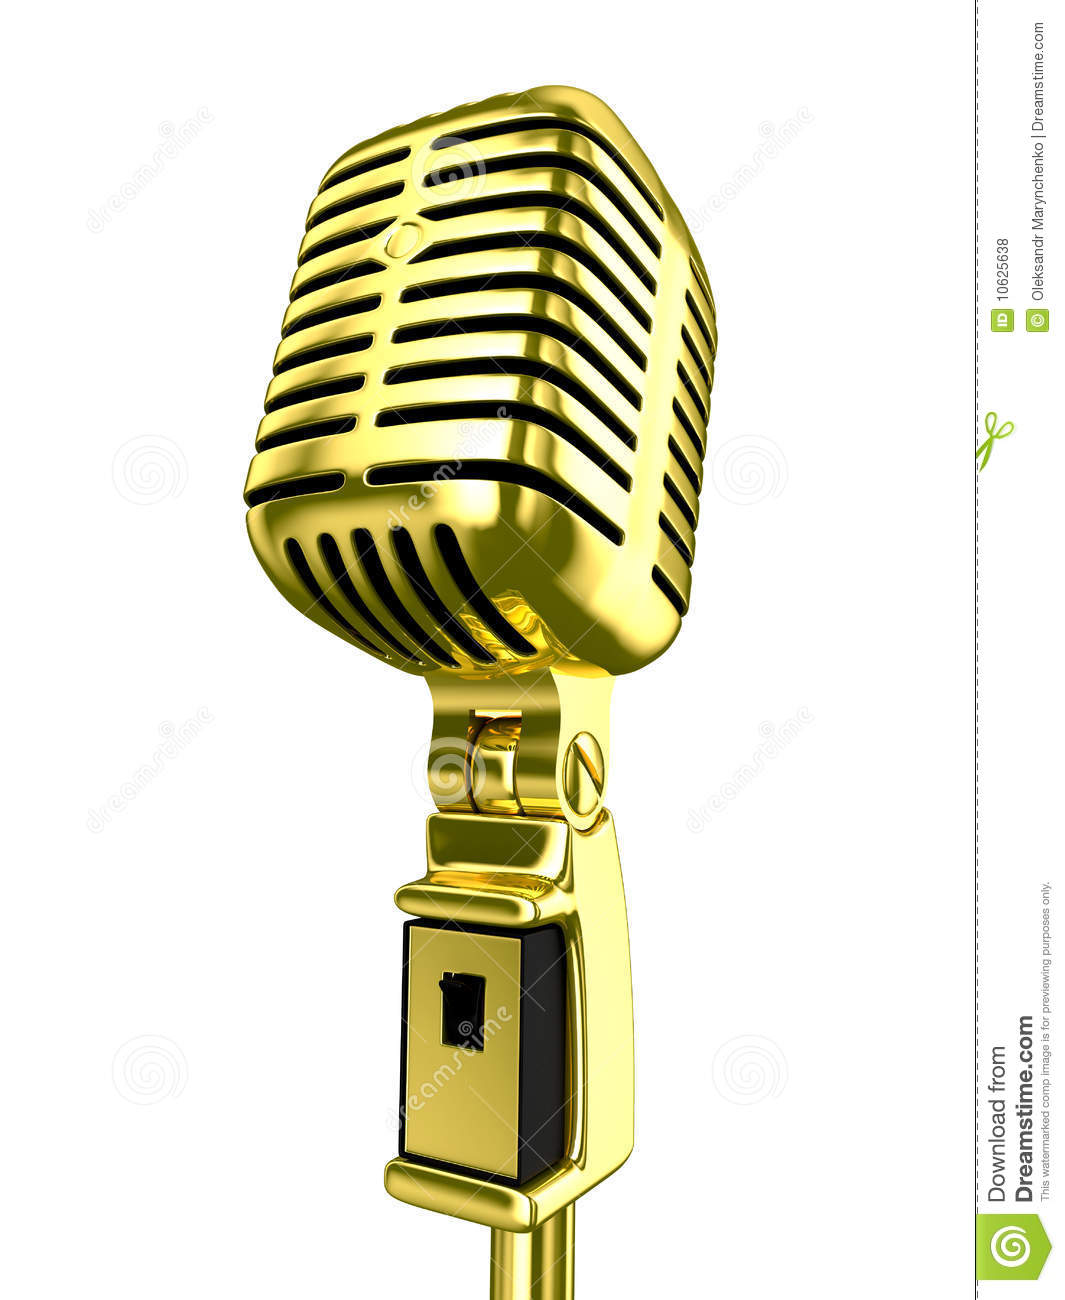 Vintage Microphone Royalty Free Stock Photos   Image  10625638